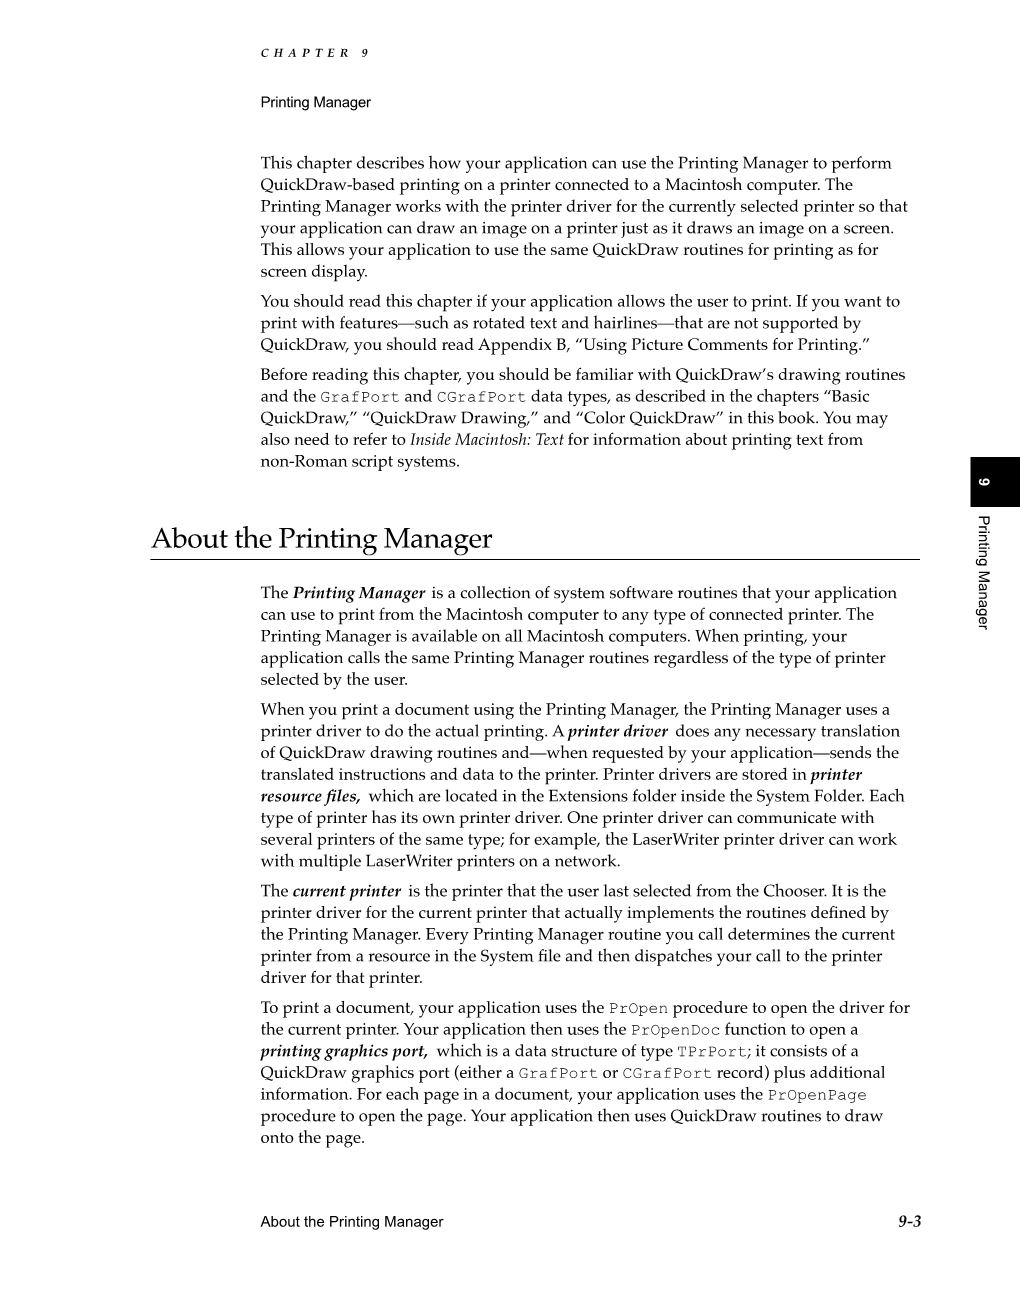 Printing Manager 9